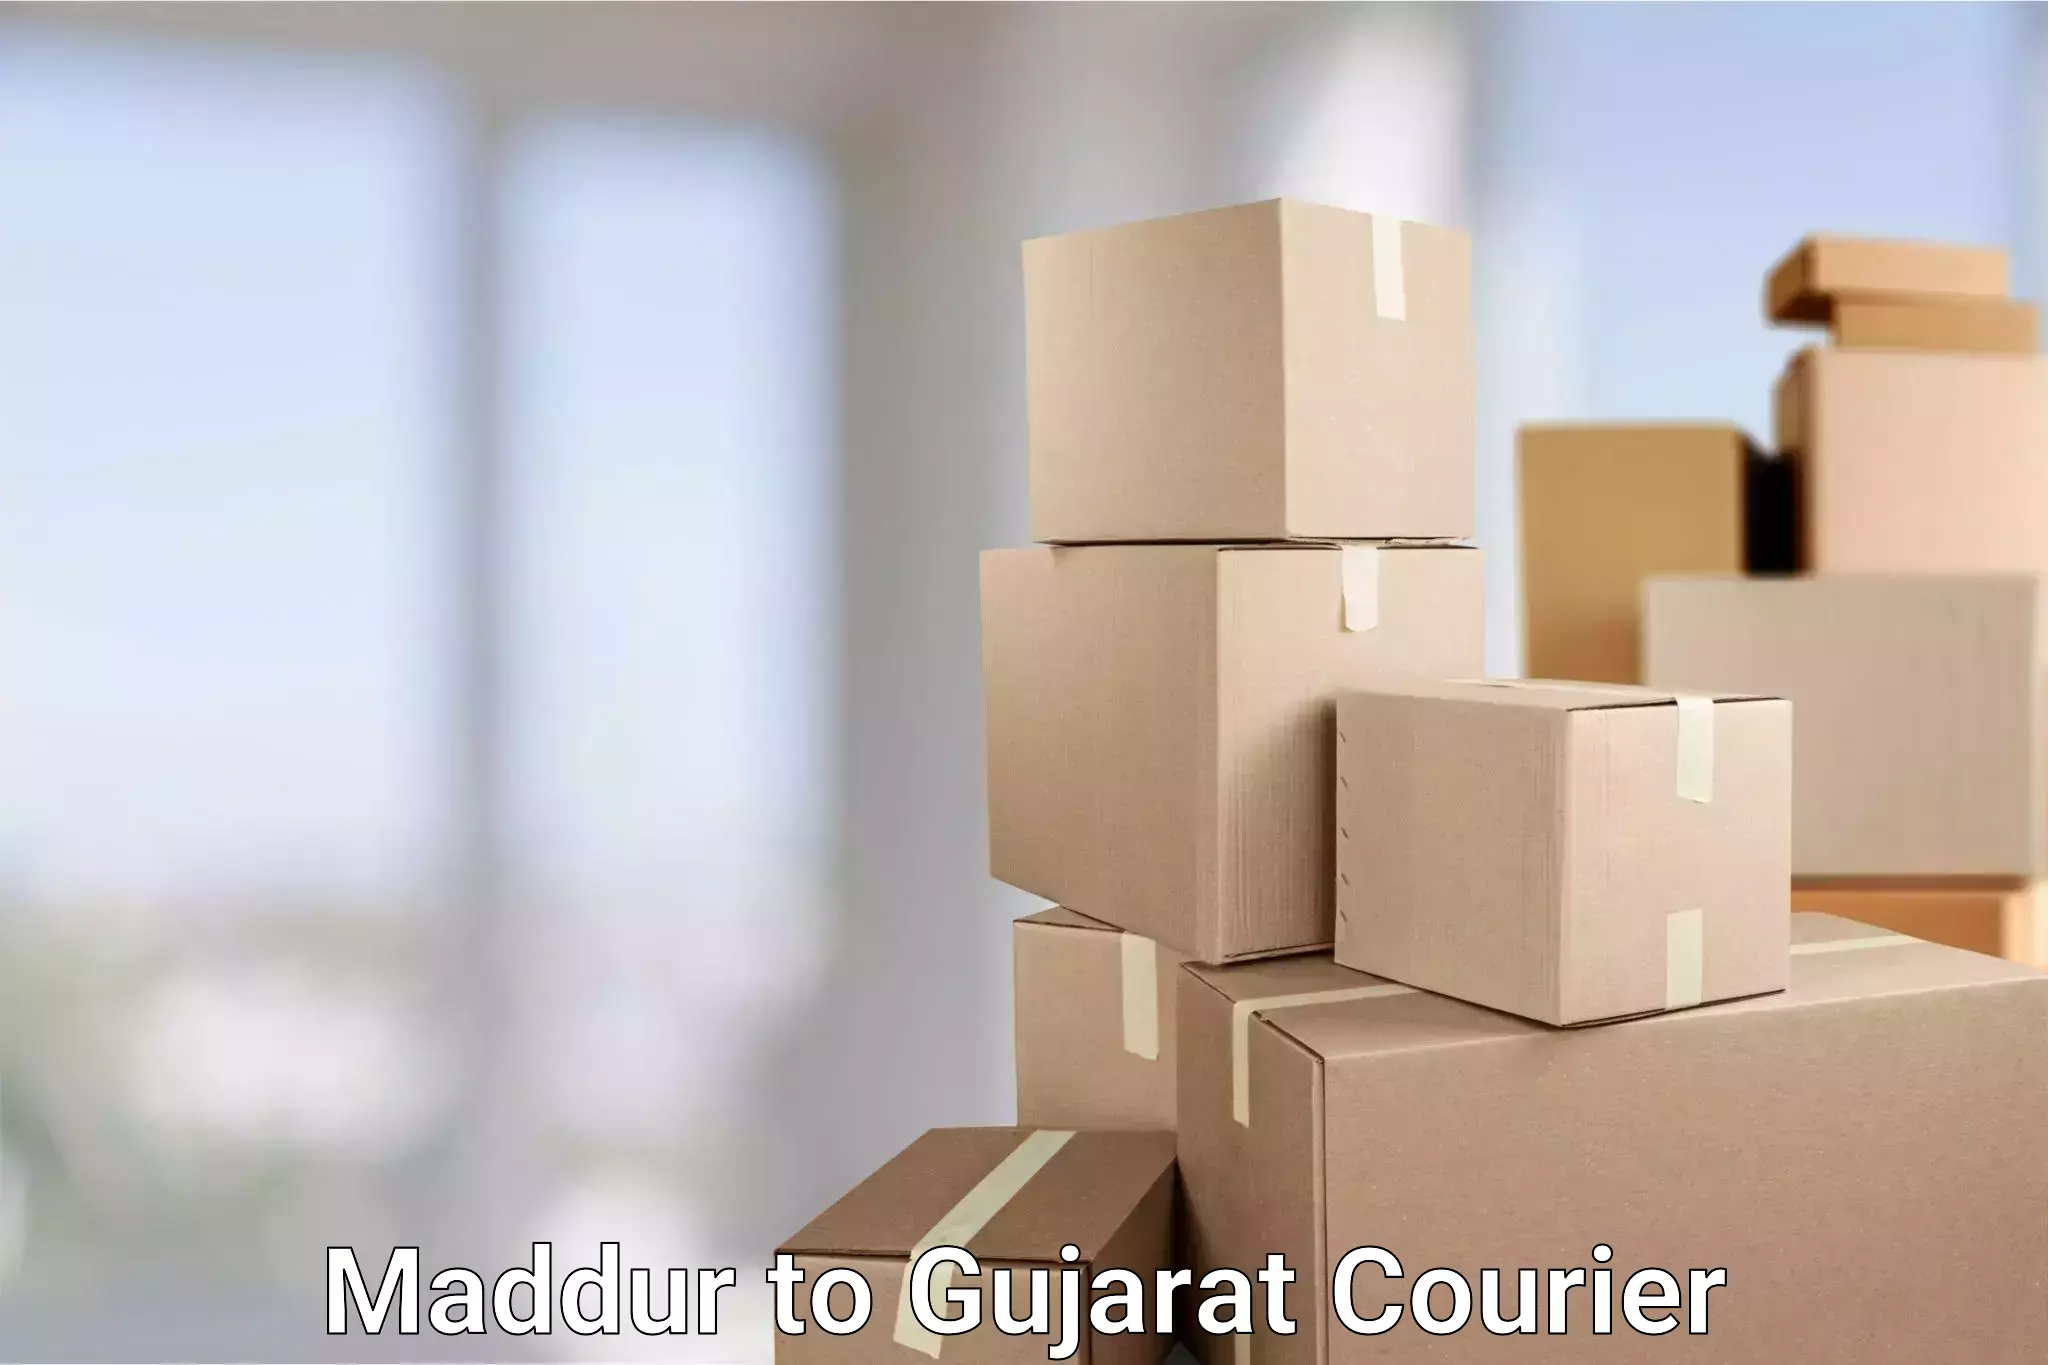 Comprehensive shipping network Maddur to Palanpur